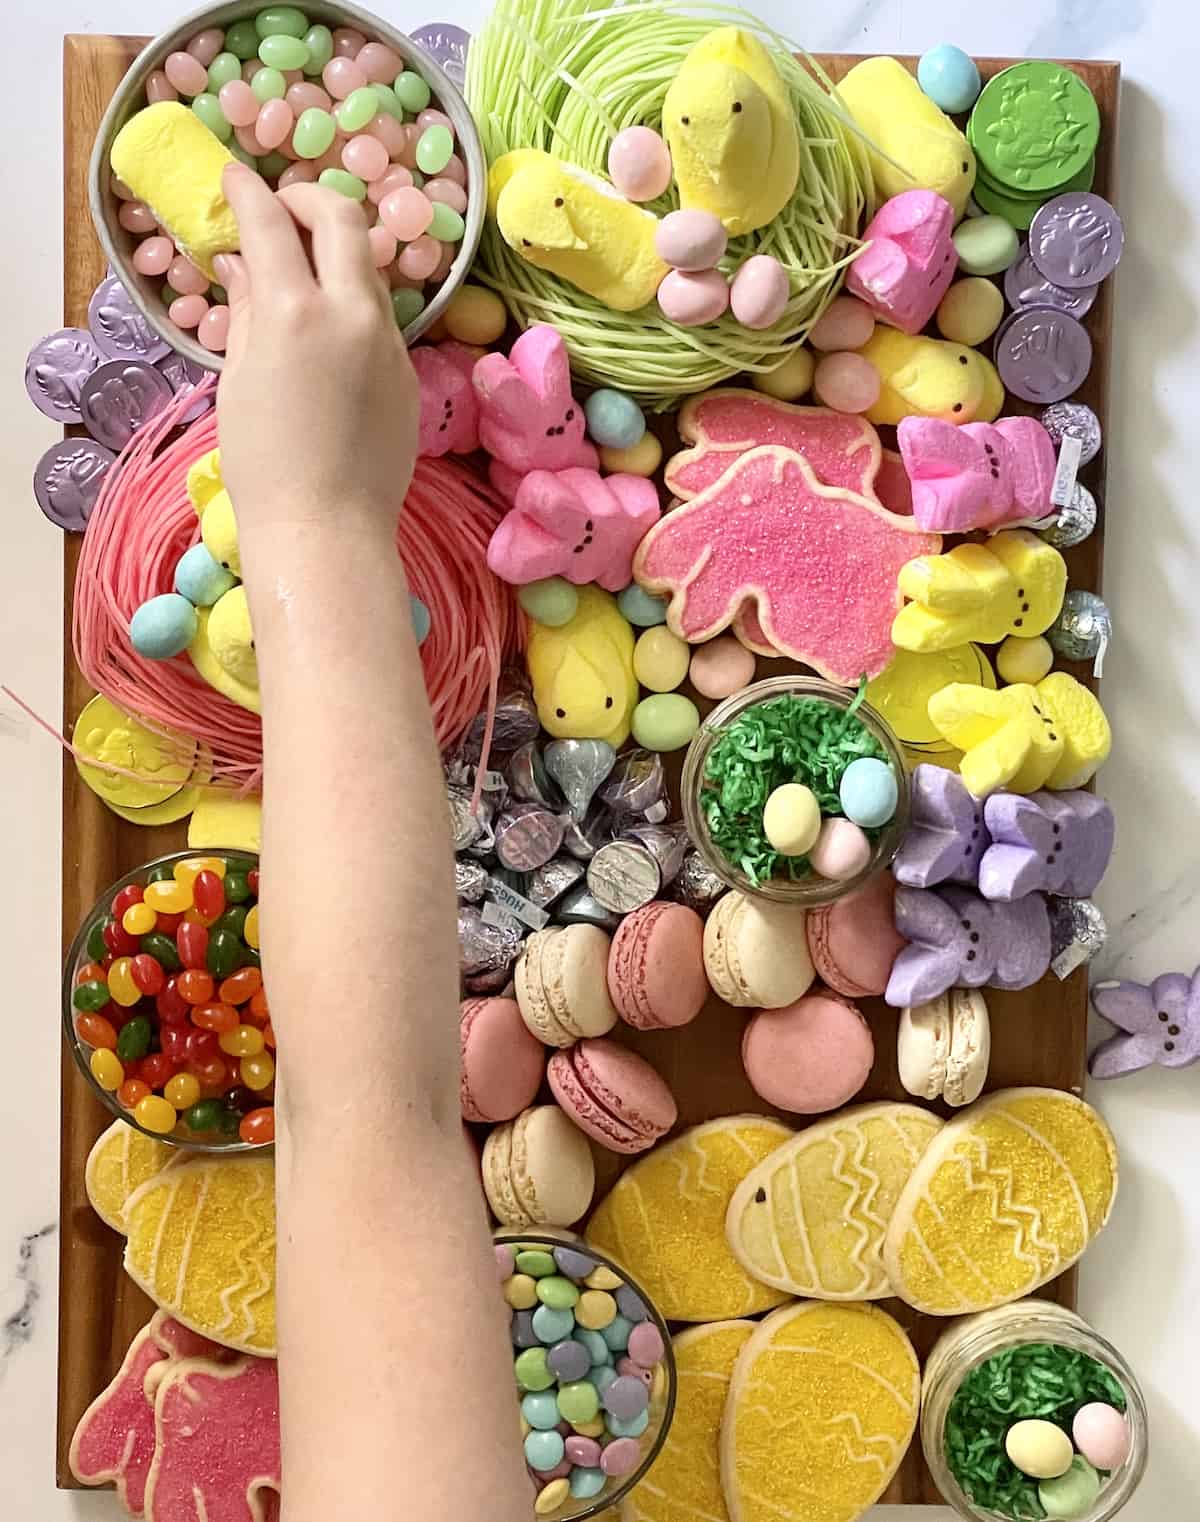 child grabbing candy off a charcuterie board